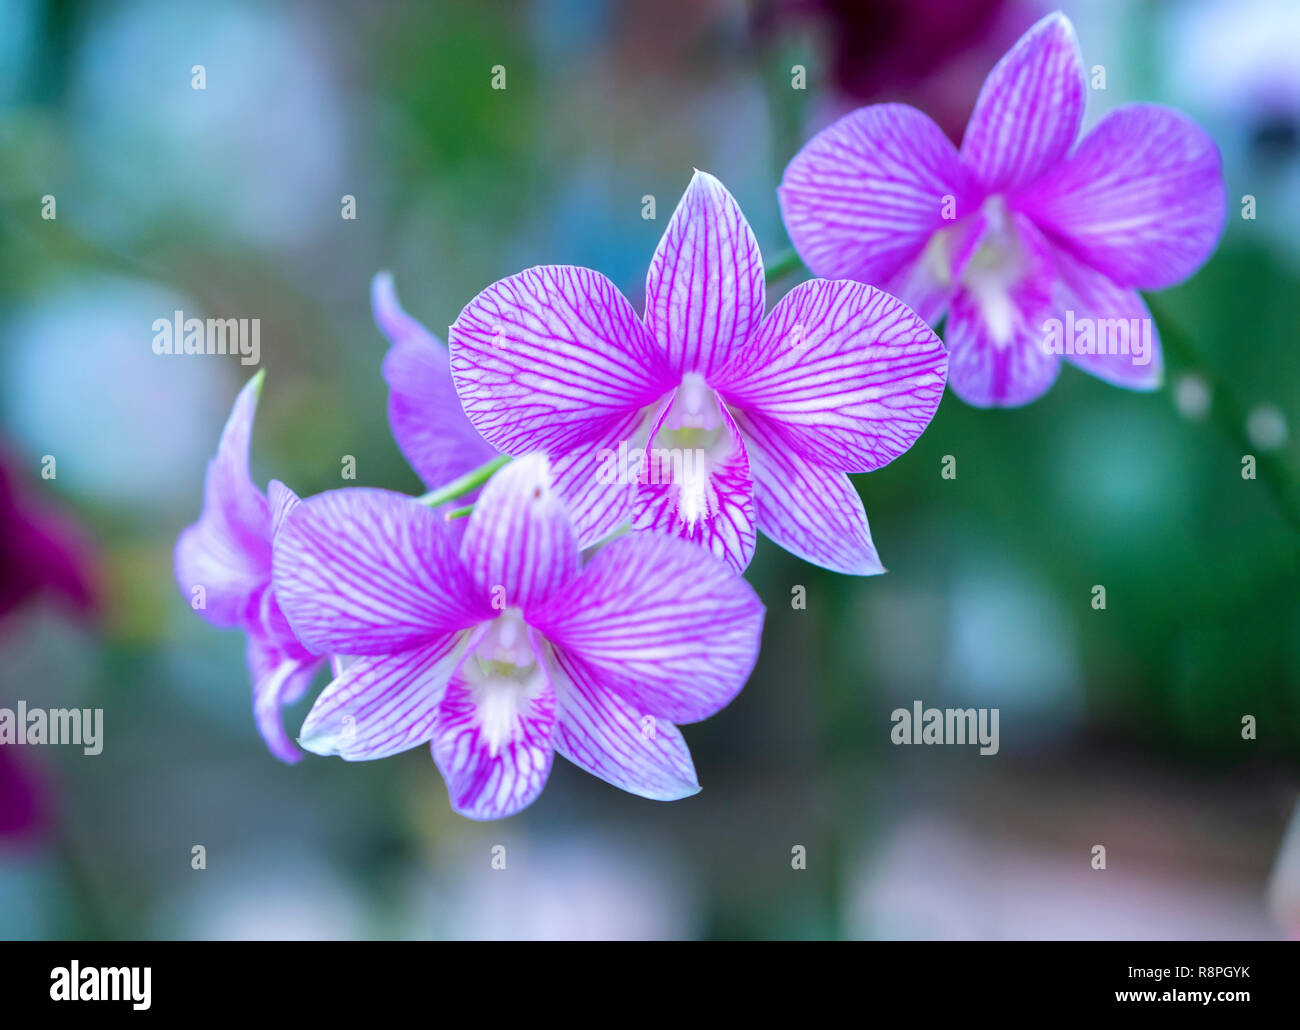 Cattleya Labiata flowers bloom in spring adorn the beauty of nature Stock Photo